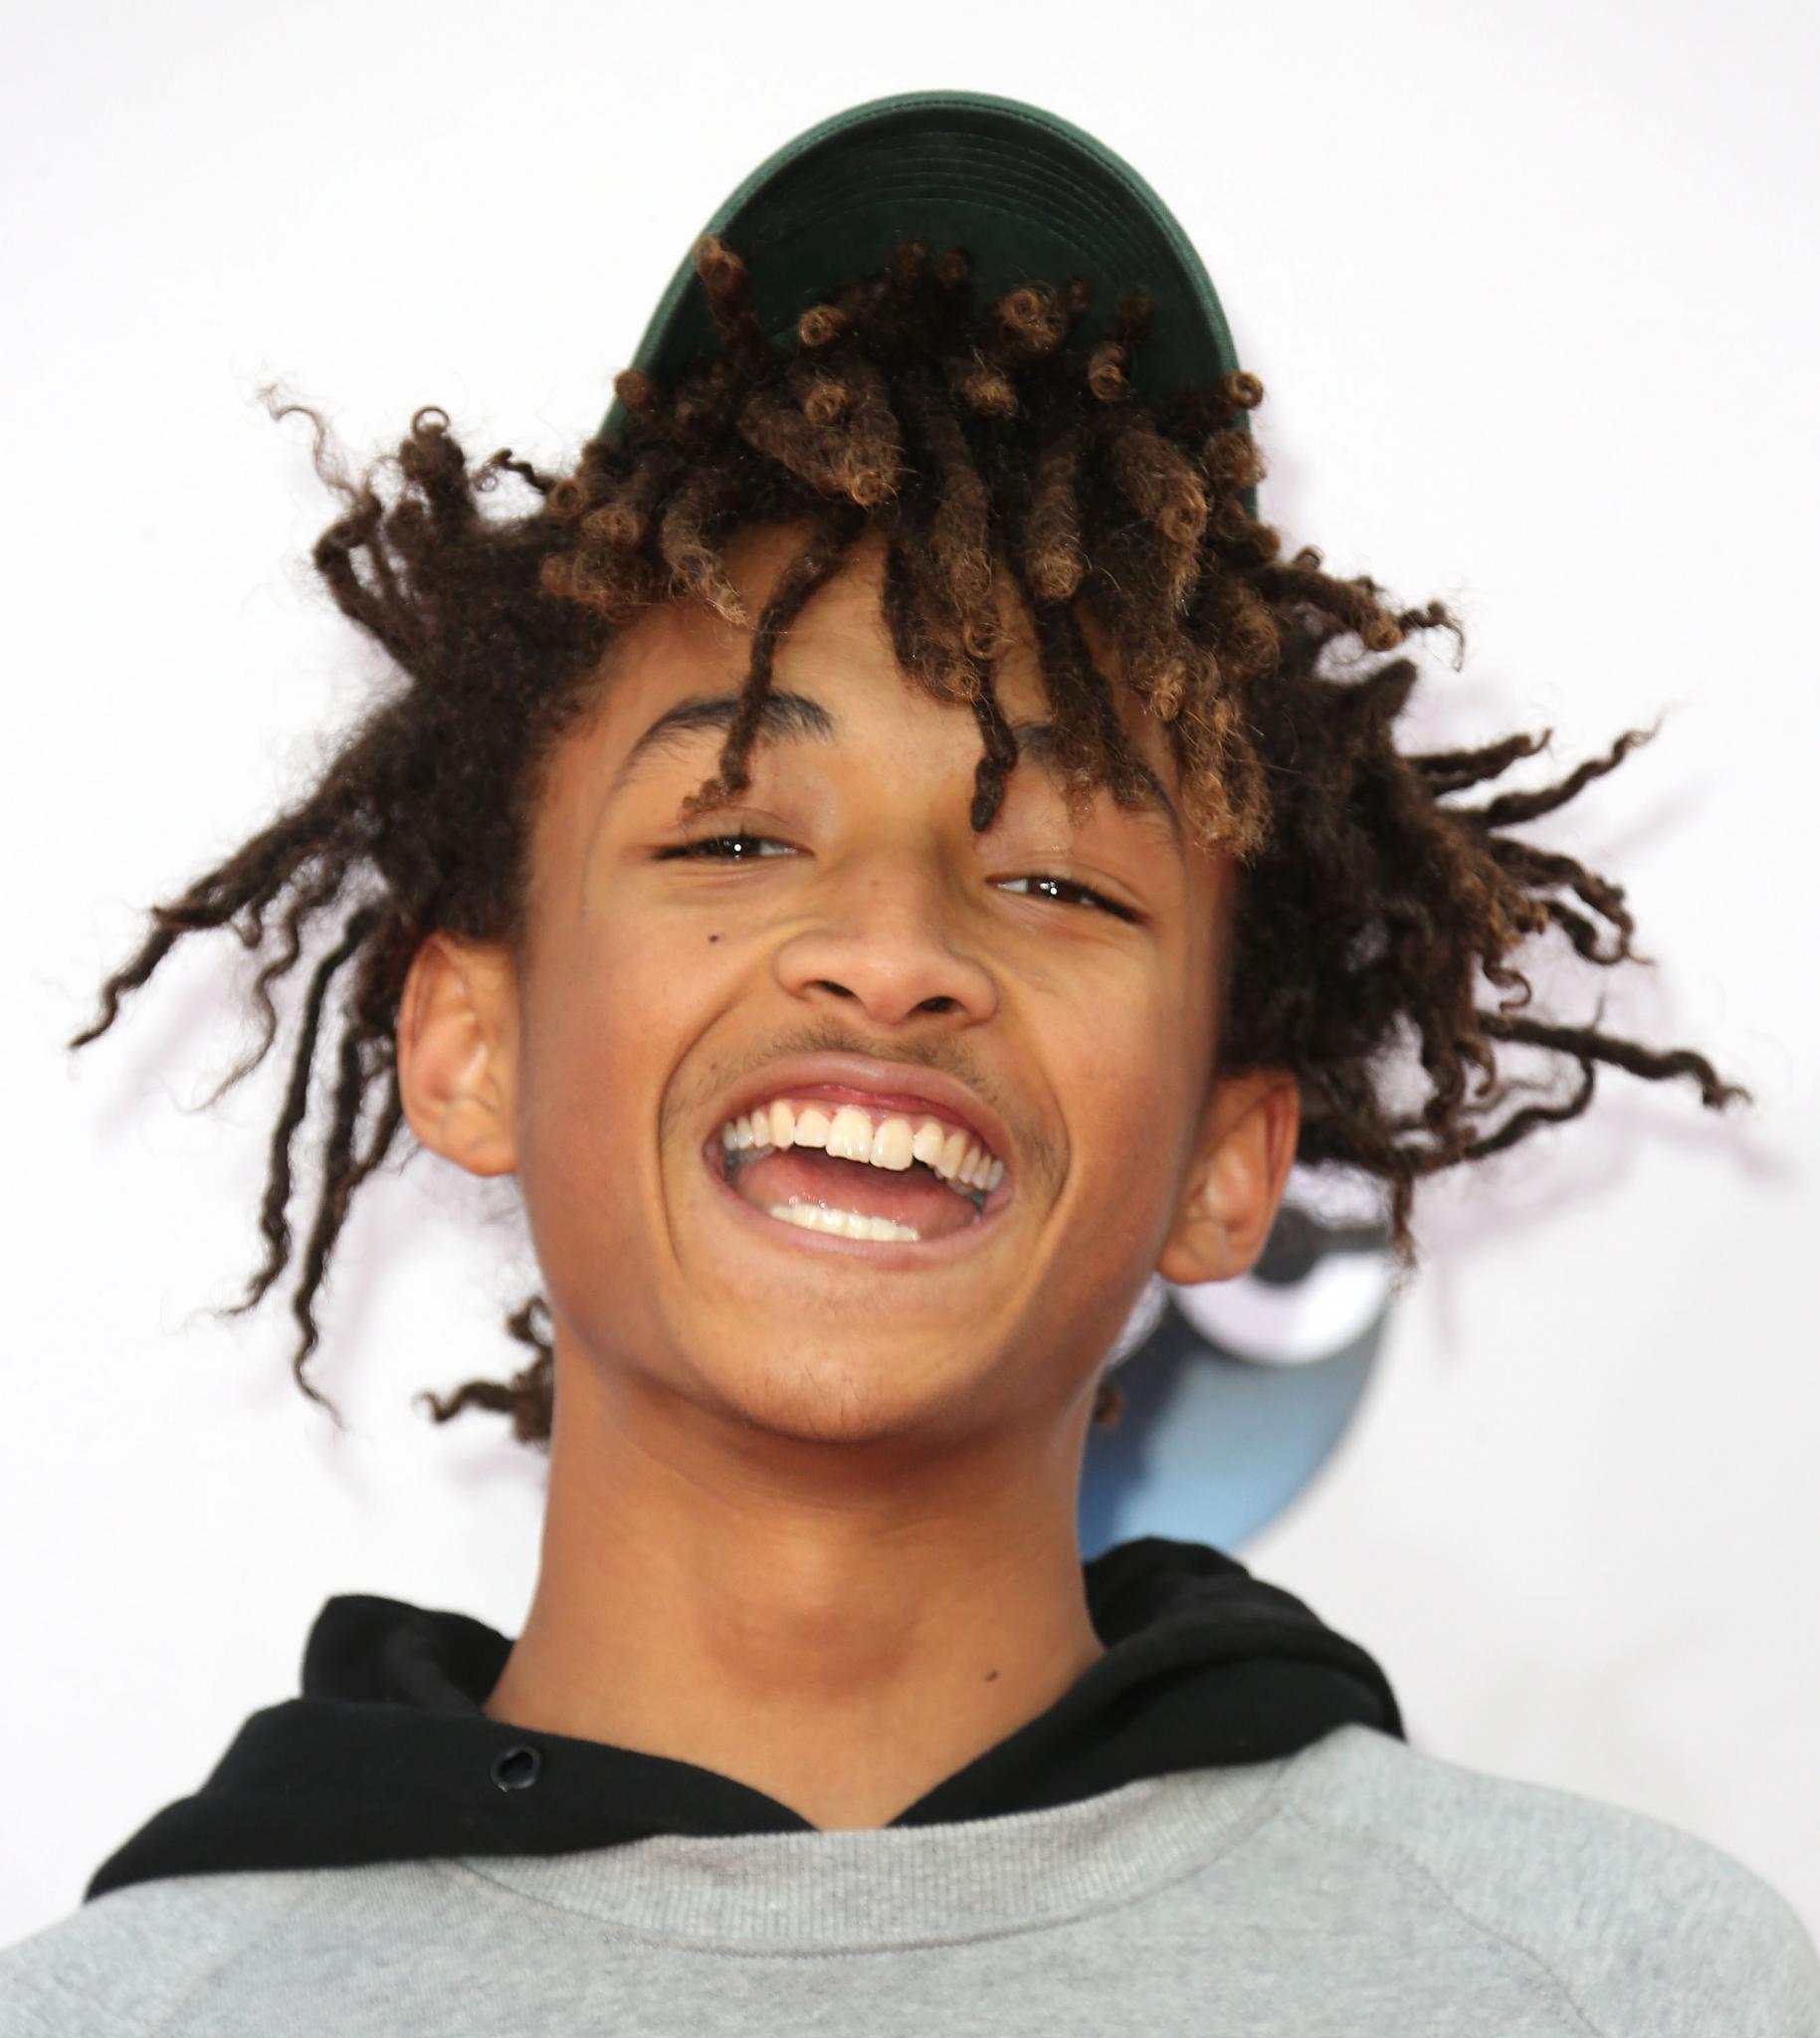 Jaden Smith and Maya Rudolph to Star in New HBO Pilot